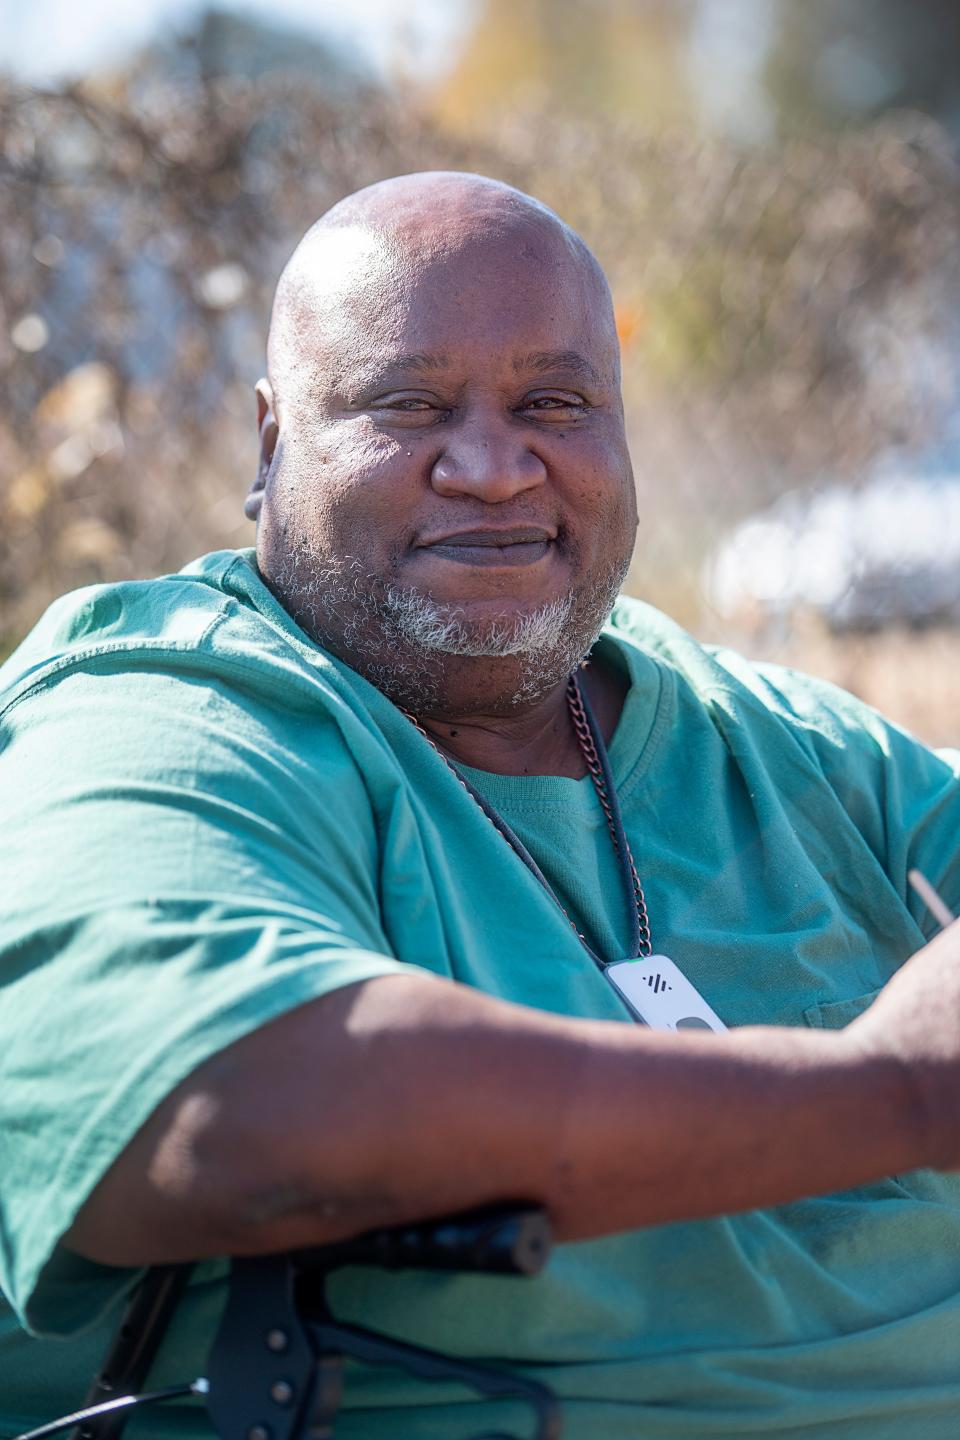 James Blount, who goes by "Brother James," has been coming to Haywood for seven years. He arrived in Asheville from Atlanta, though he grew up in Polk County, and said he was homeless when he left the city. “I came to Asheville and decided I wanted to get off the streets and … change my life," he said.